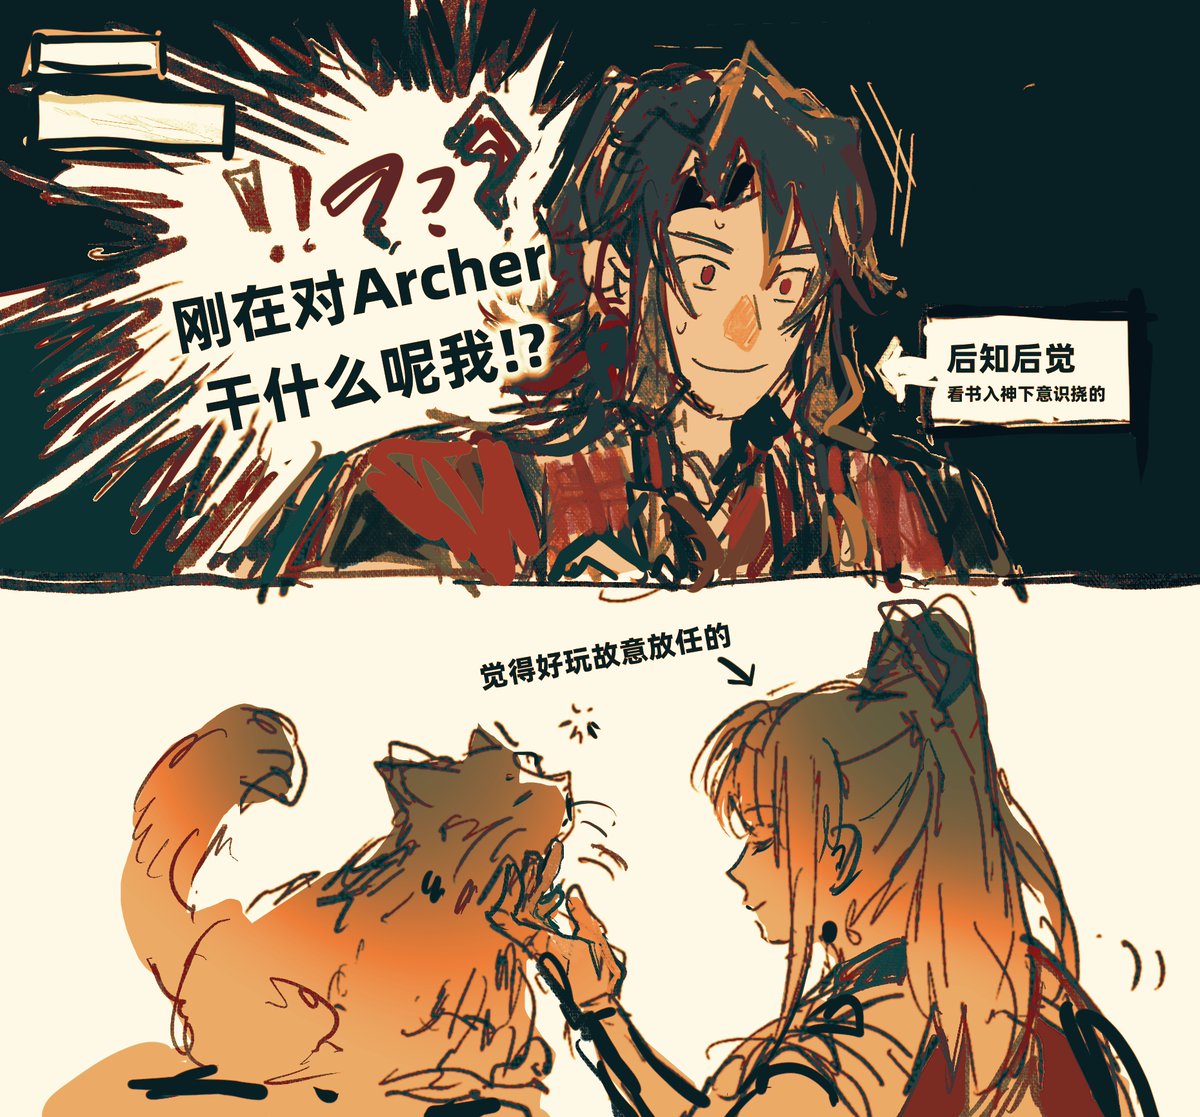 #FateSR📷 #鄭弓 #FateSR_Art Caught in his book, Zheng Mingyan subconsciously thought his servant's chin was a cat's and gave it a scratch…  He didn't have a clue, but the servant just went with it for the fun of it😉